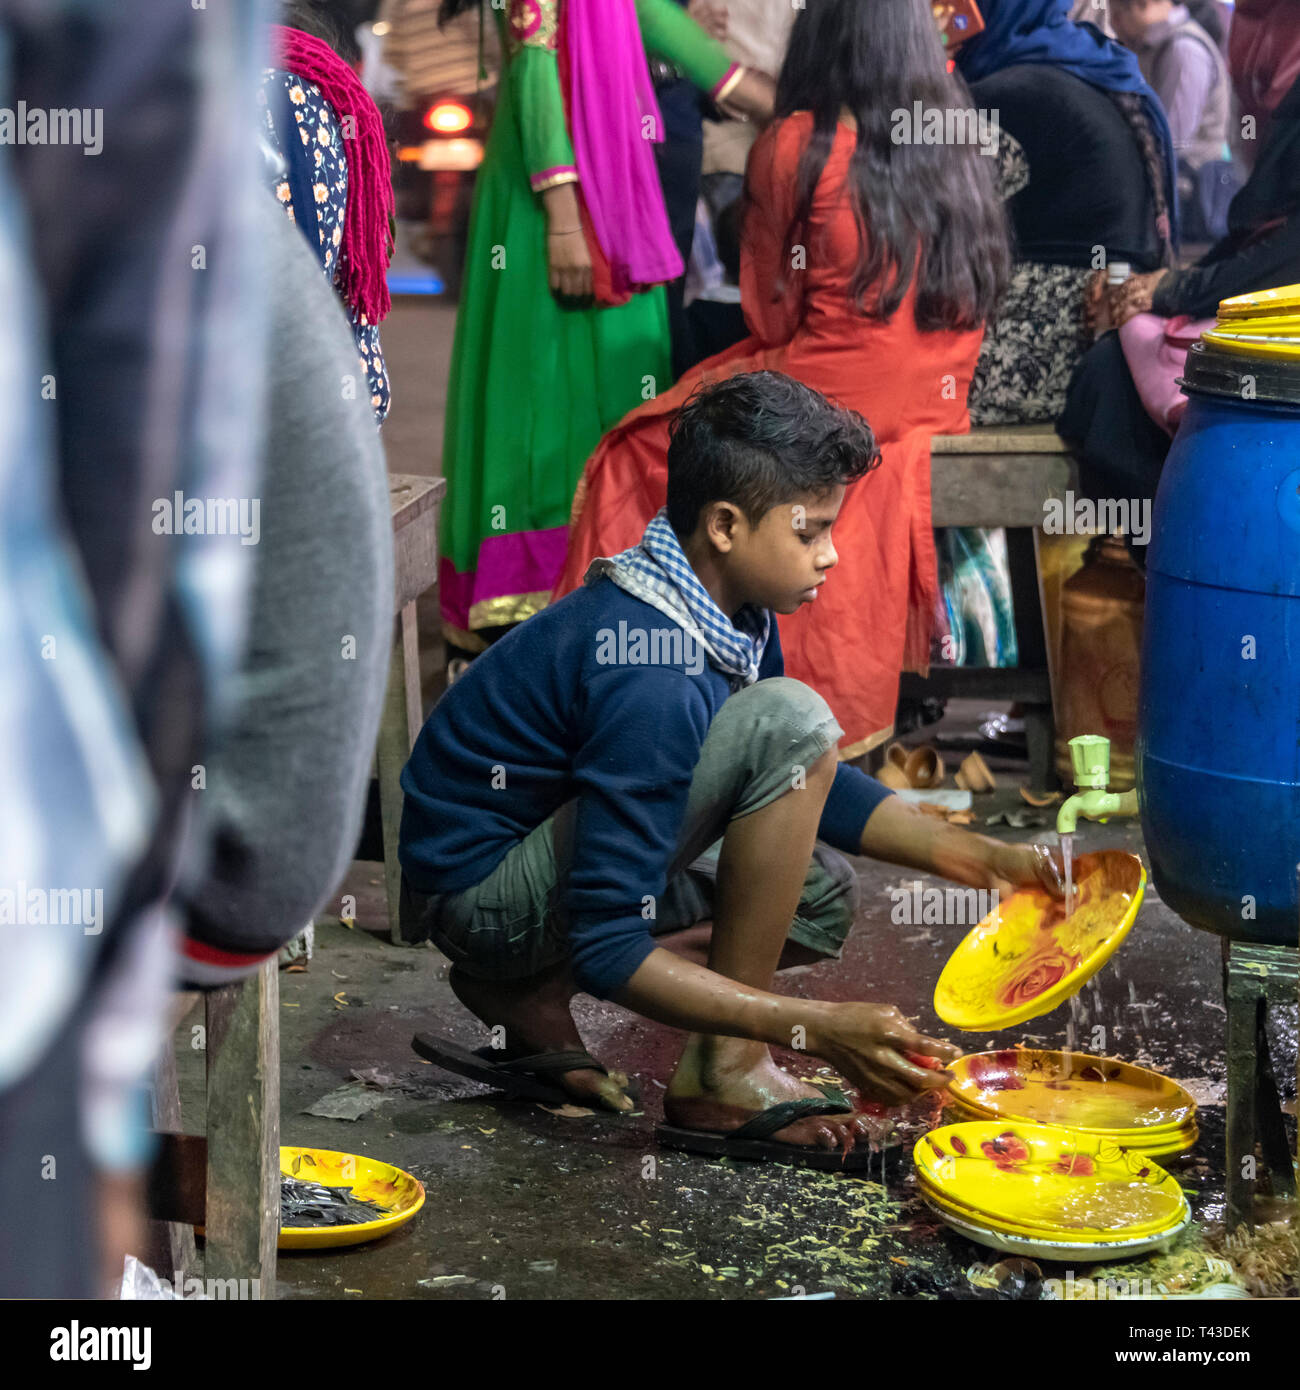 Square view of a young boy washing plates in the streets of Kolkata aka Calcutta, India. Stock Photo